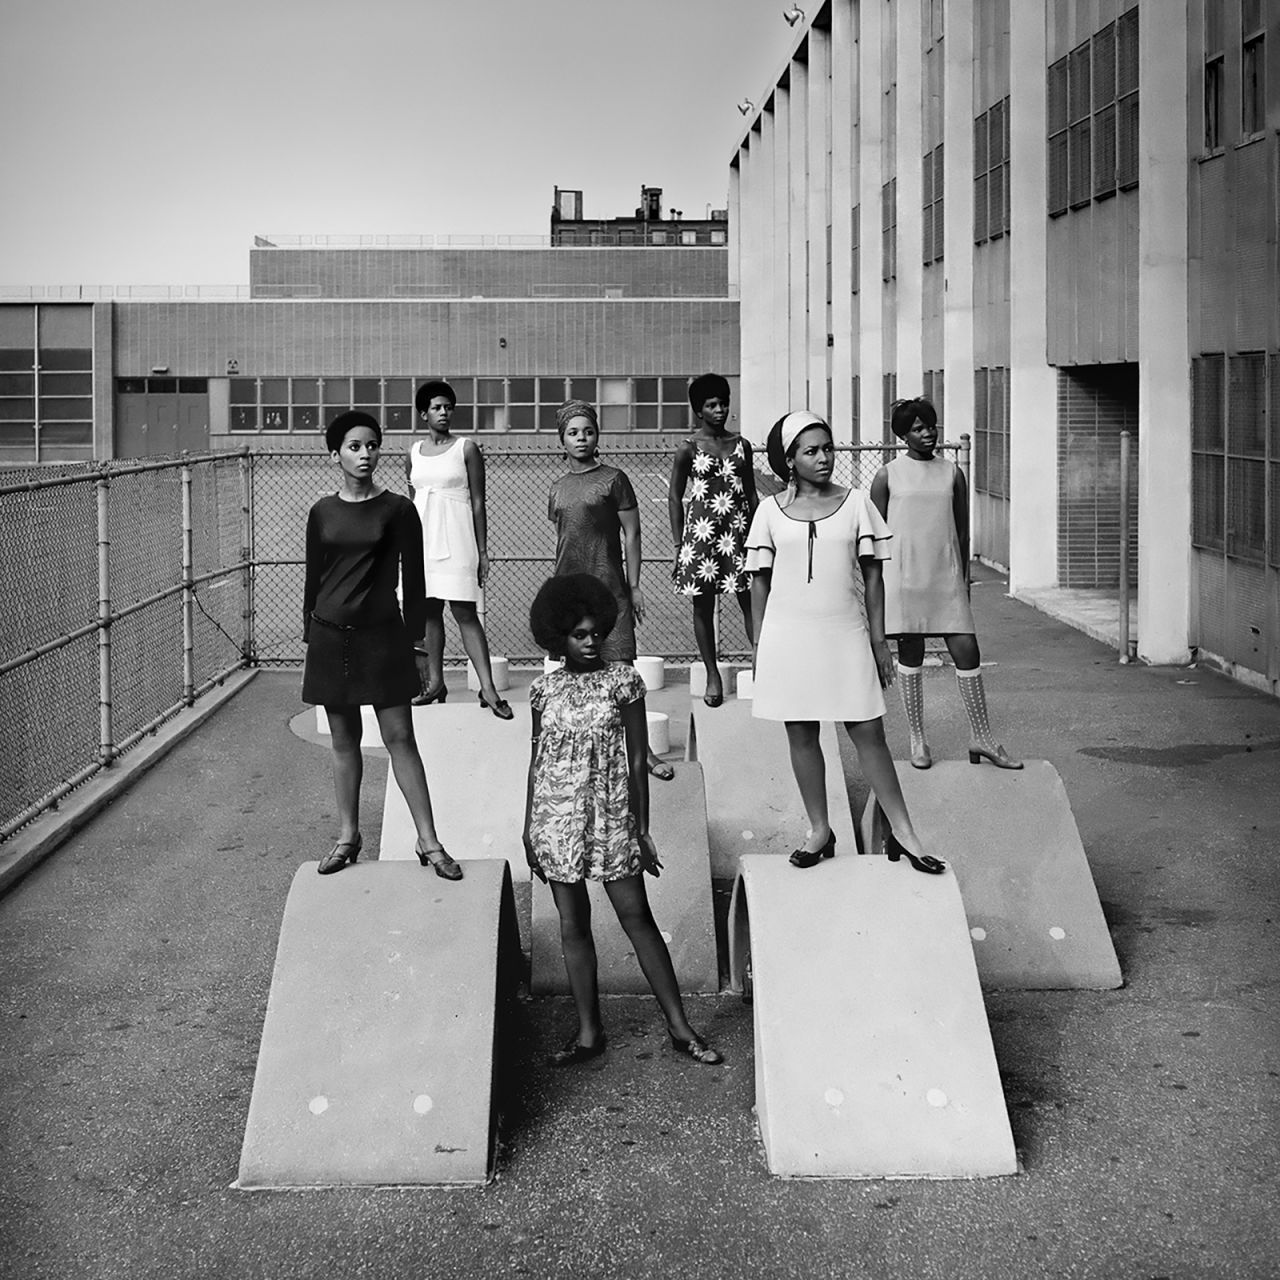 Brathwaite's photograph of models who embraced their natural hair, photographed in 1966.